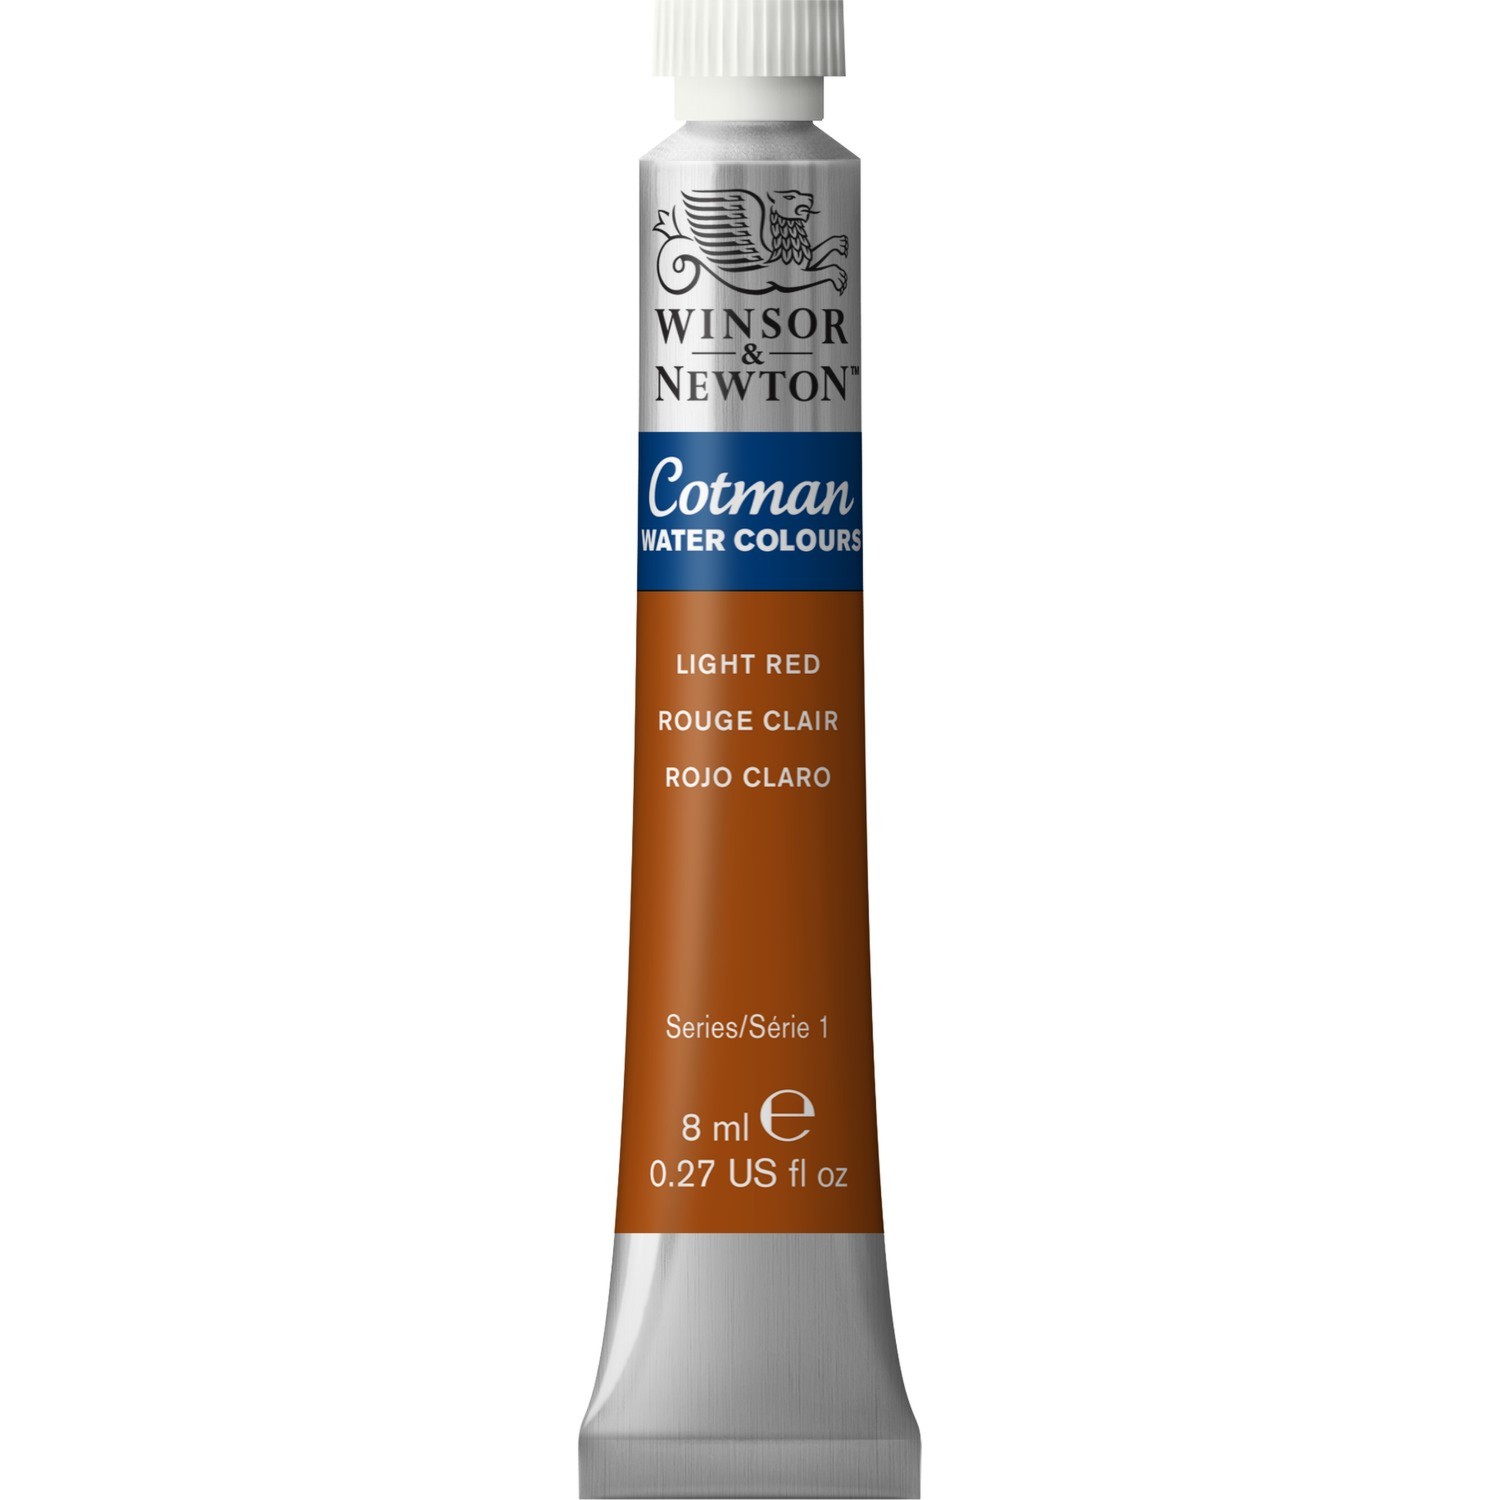 Winsor and Newton Cotman Watercolour Paint - Light Red Image 1